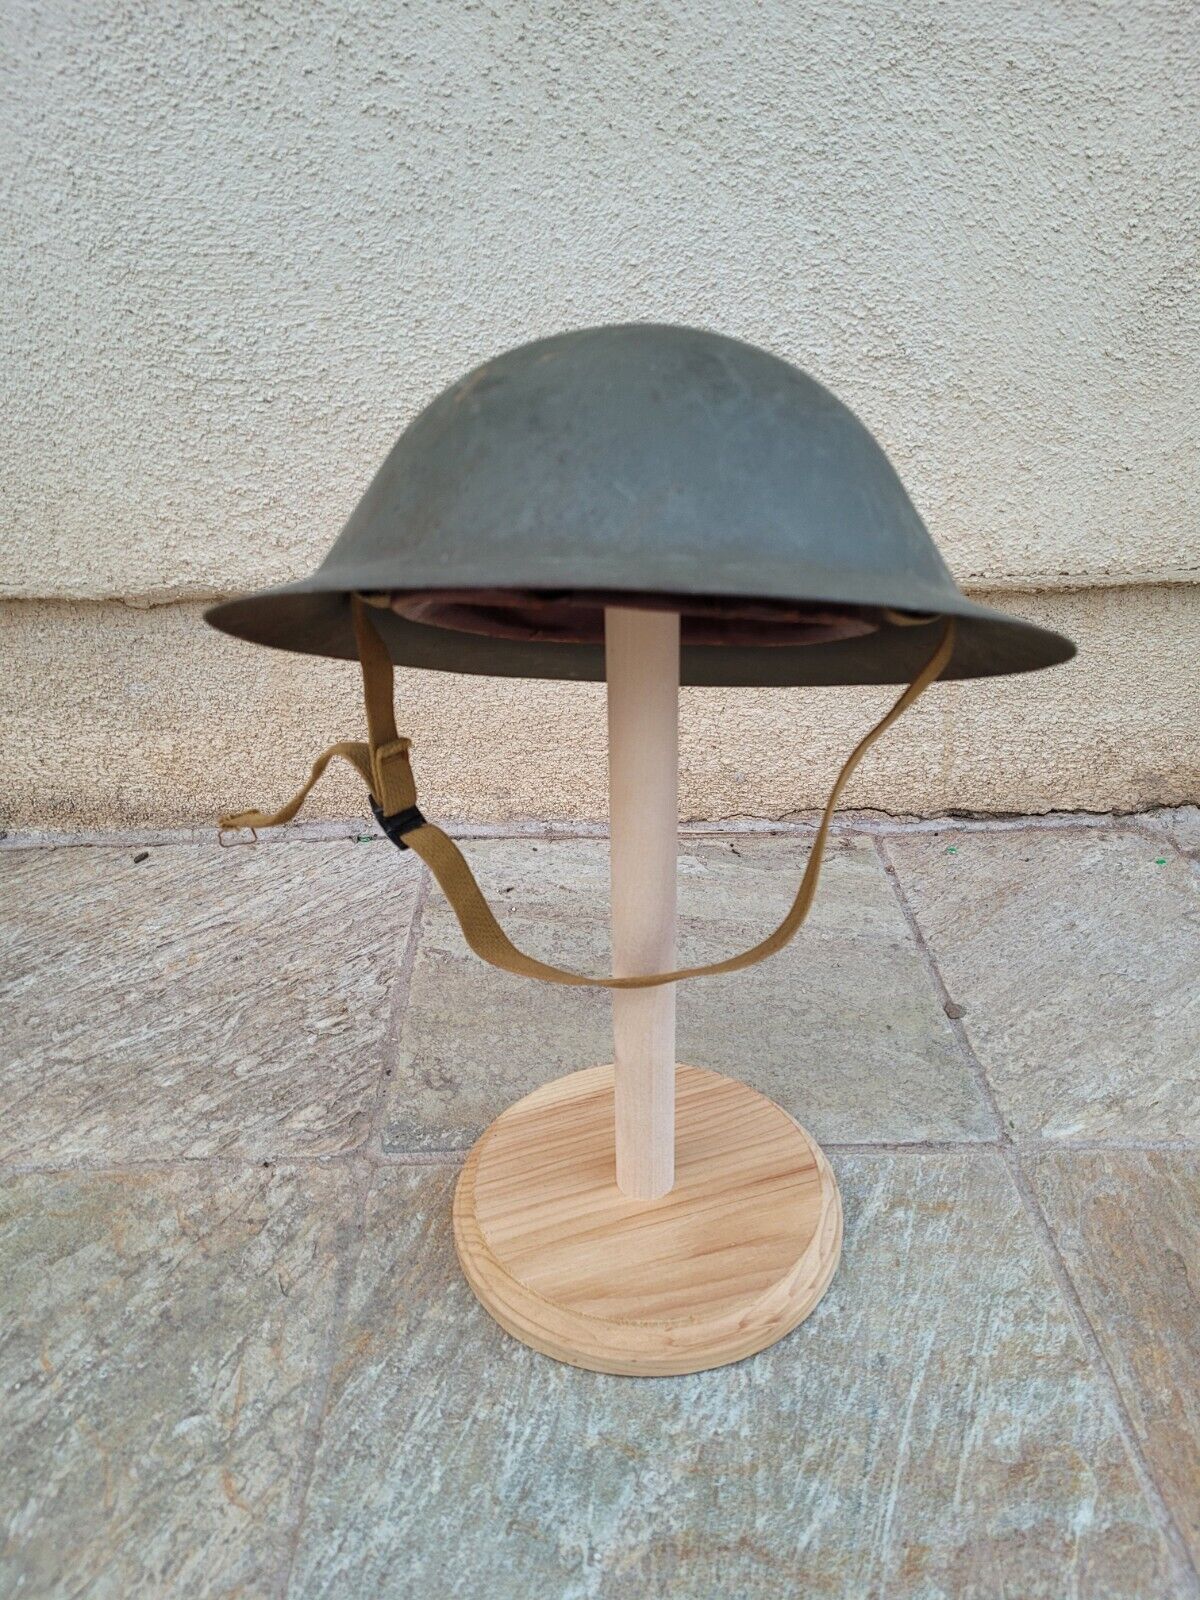 VINTAGE WWI M1917A1 STYLE US MILITARY HELMET - DOUGHBOY